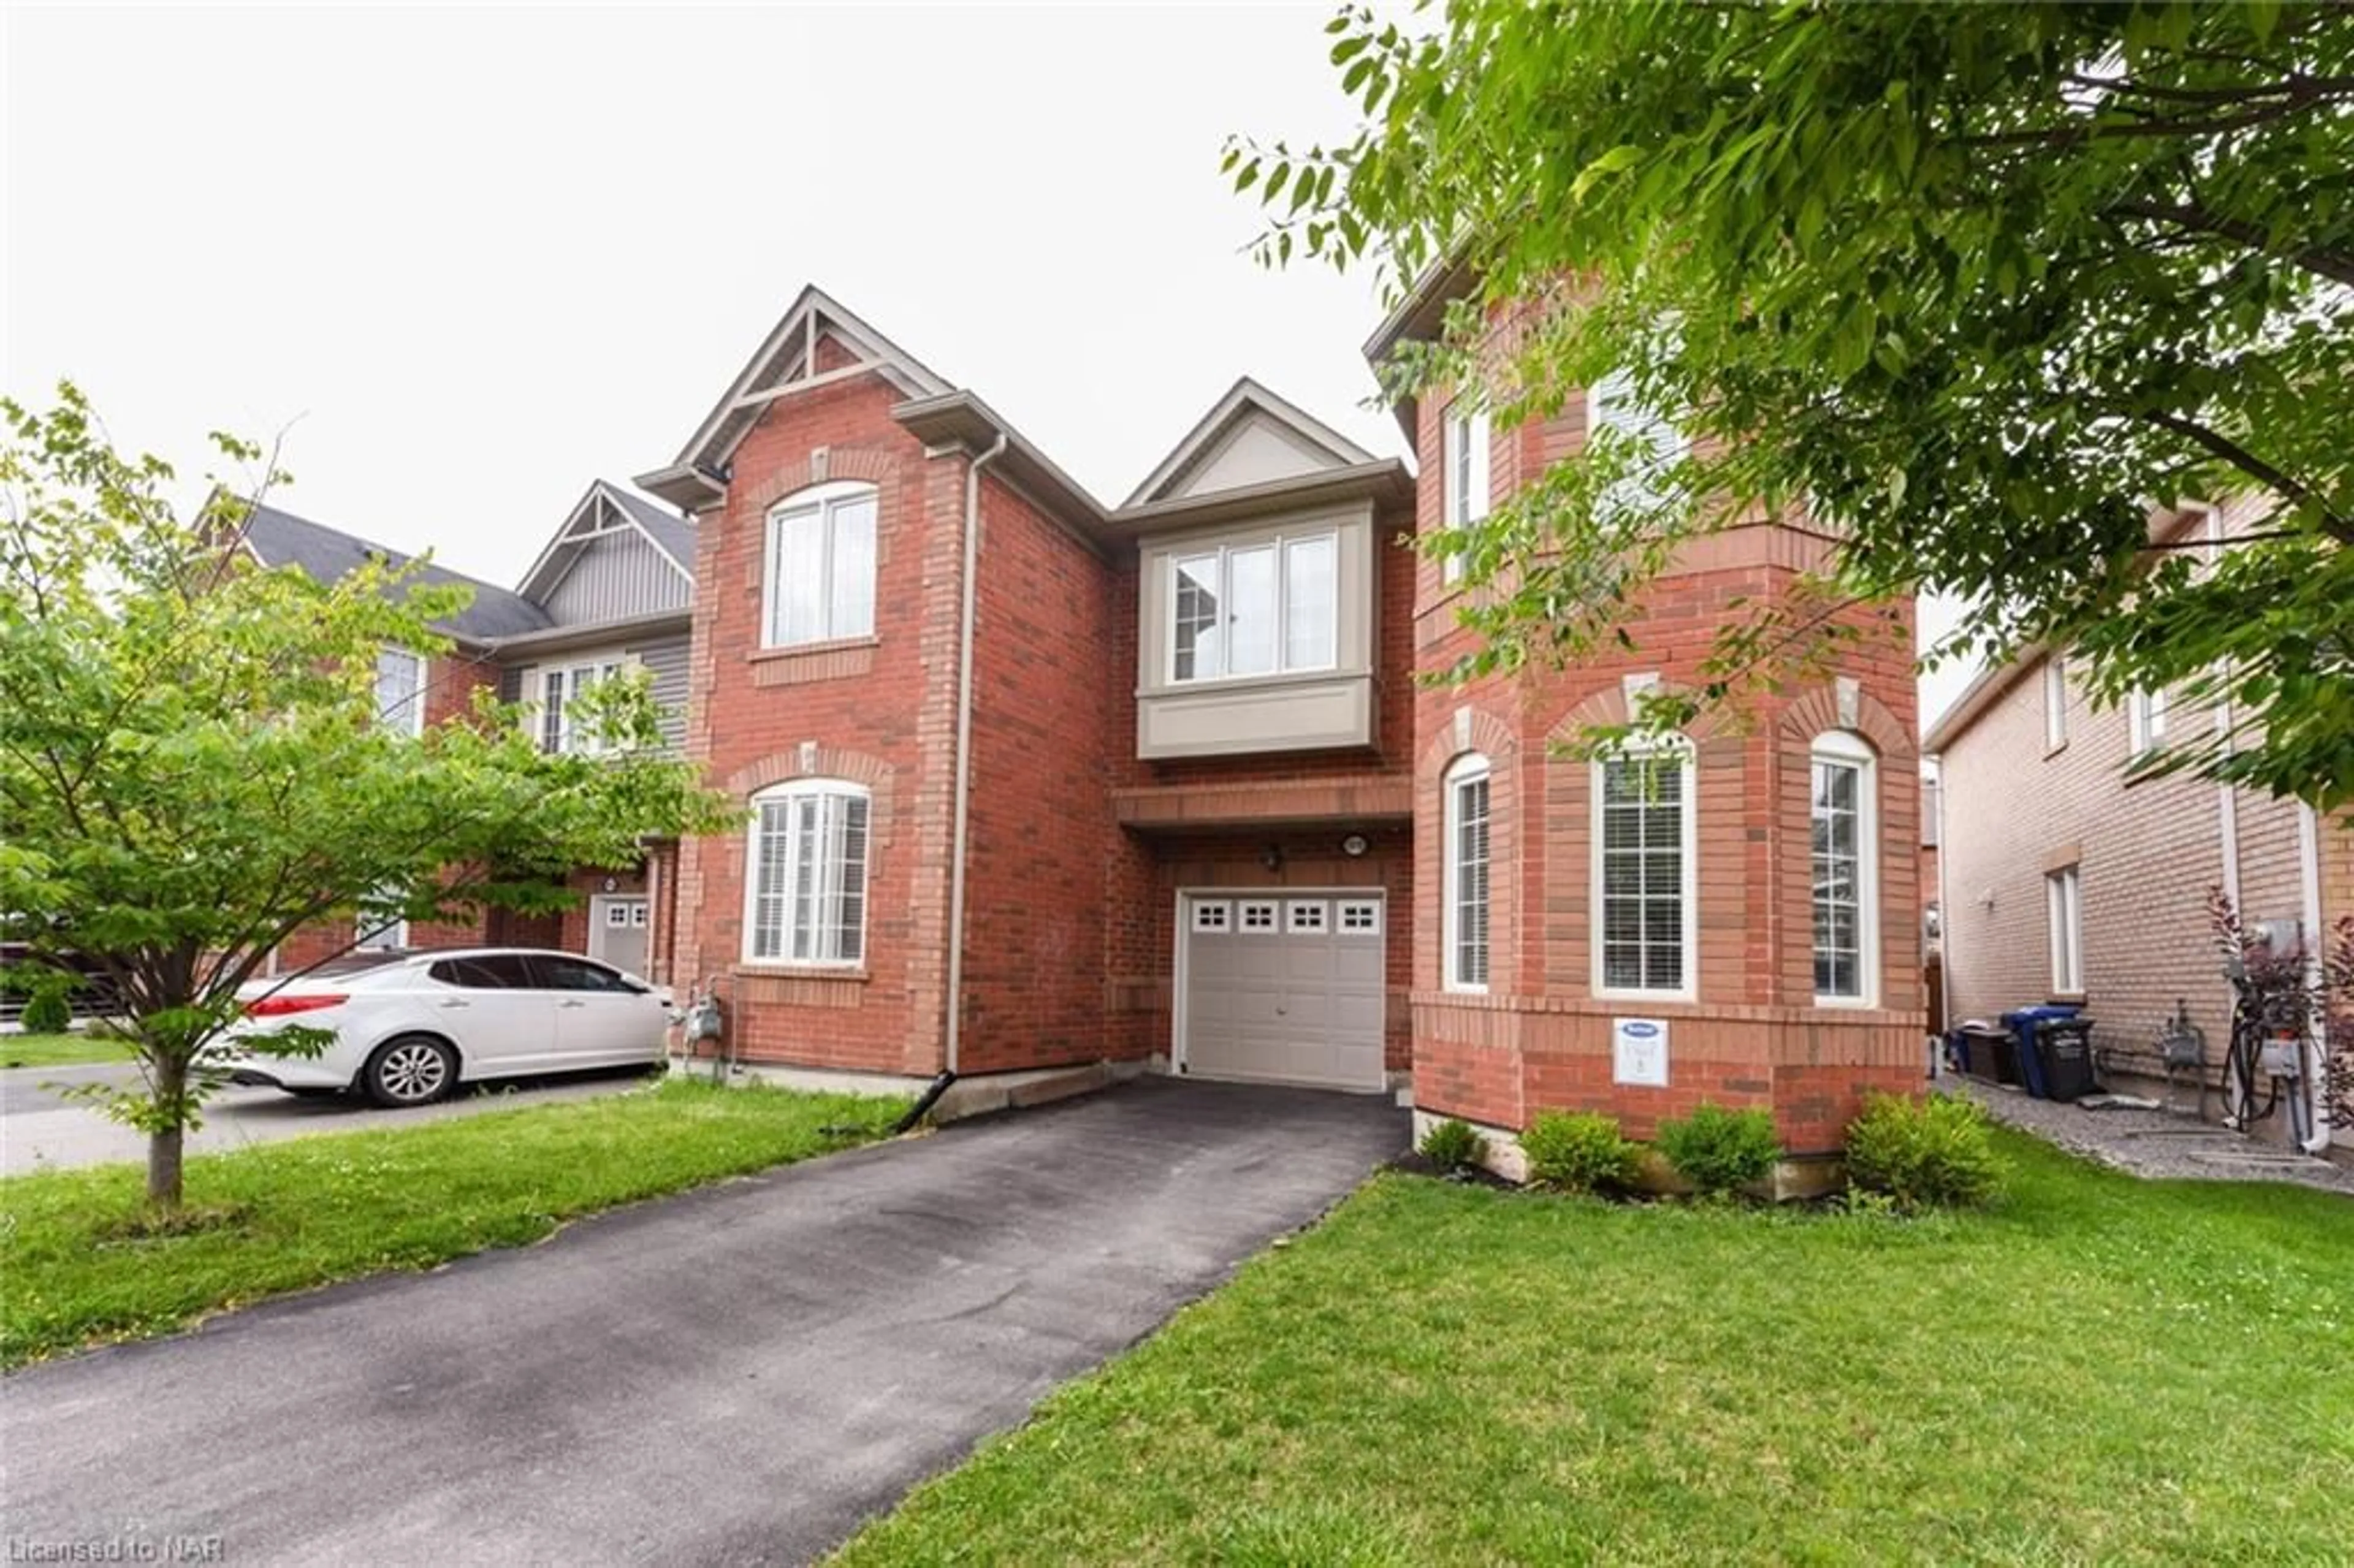 Home with brick exterior material for 1018 Timmer Pl, Milton Ontario L9T 8H3